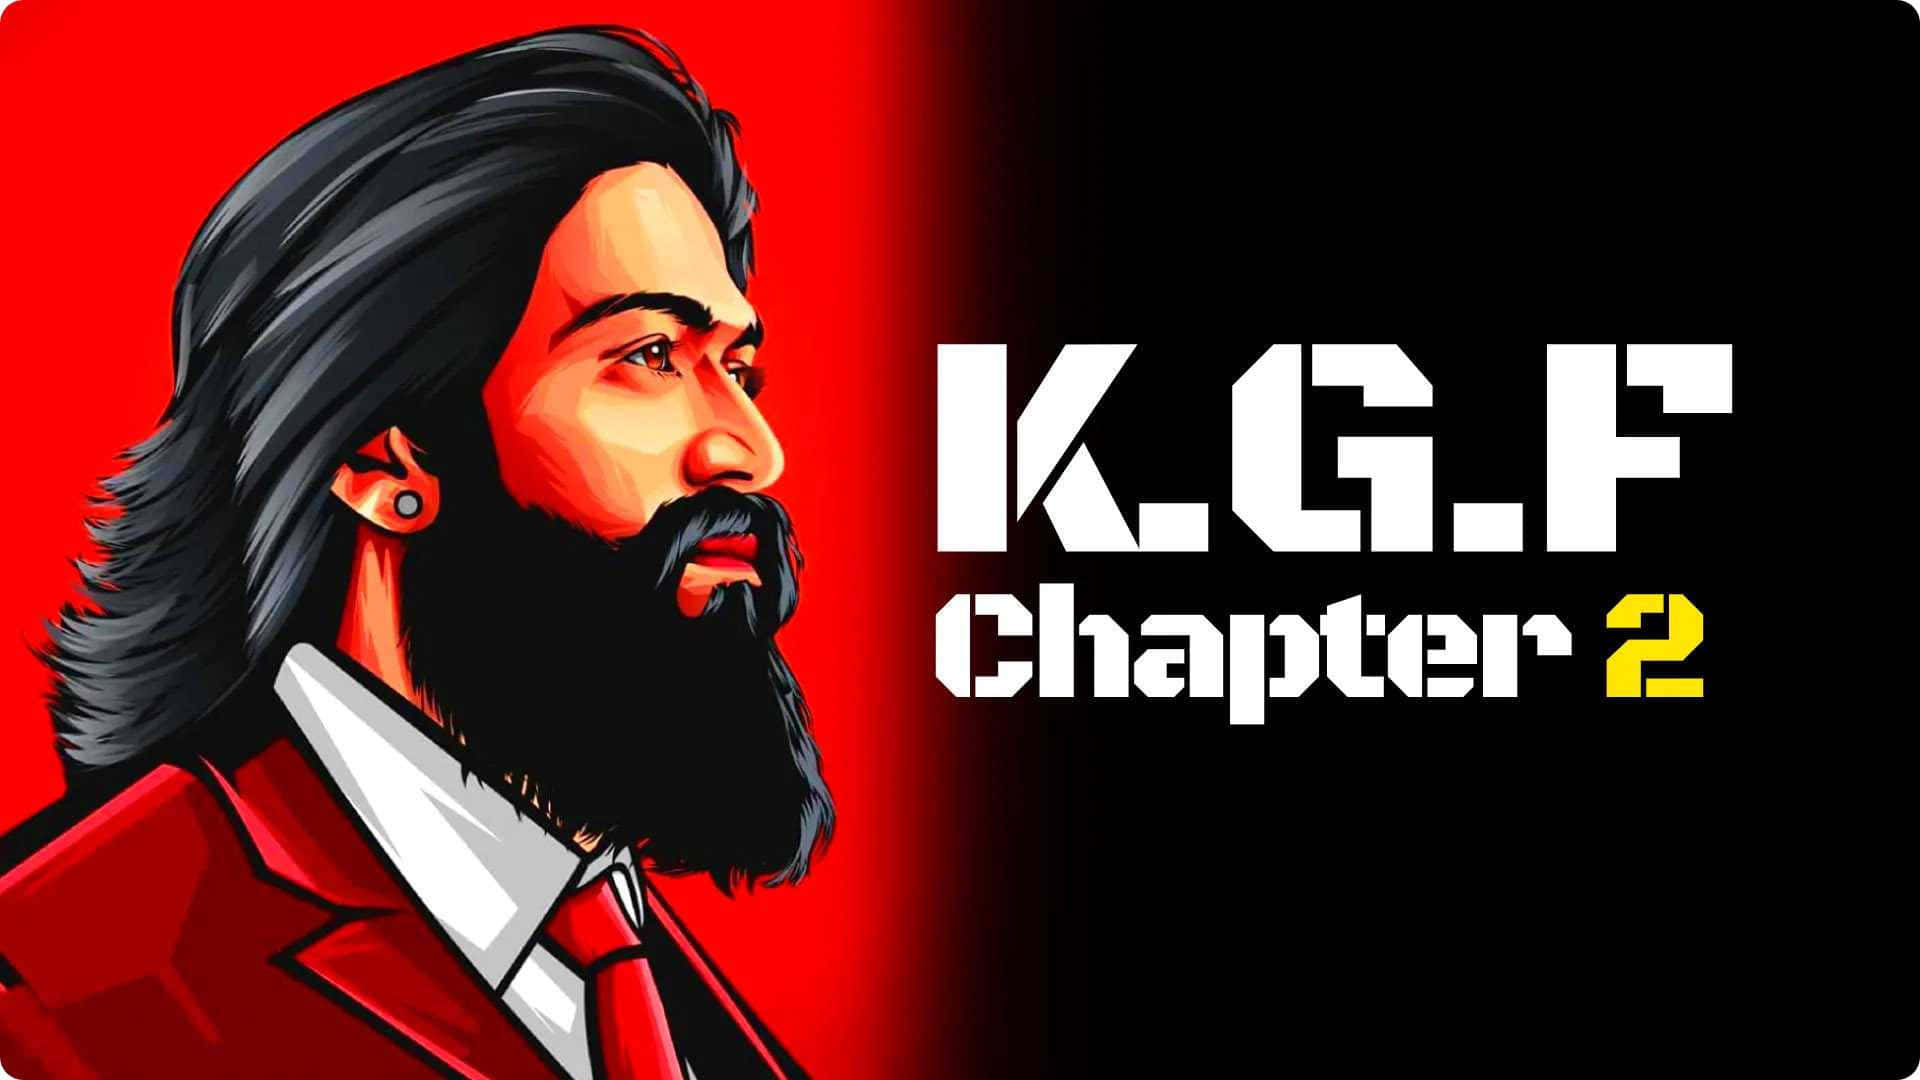 KGF Chapter 2 Movie HD Wallpapers | KGF Chapter 2 HD Movie Wallpapers Free  Download (1080p to 2K) - FilmiBeat